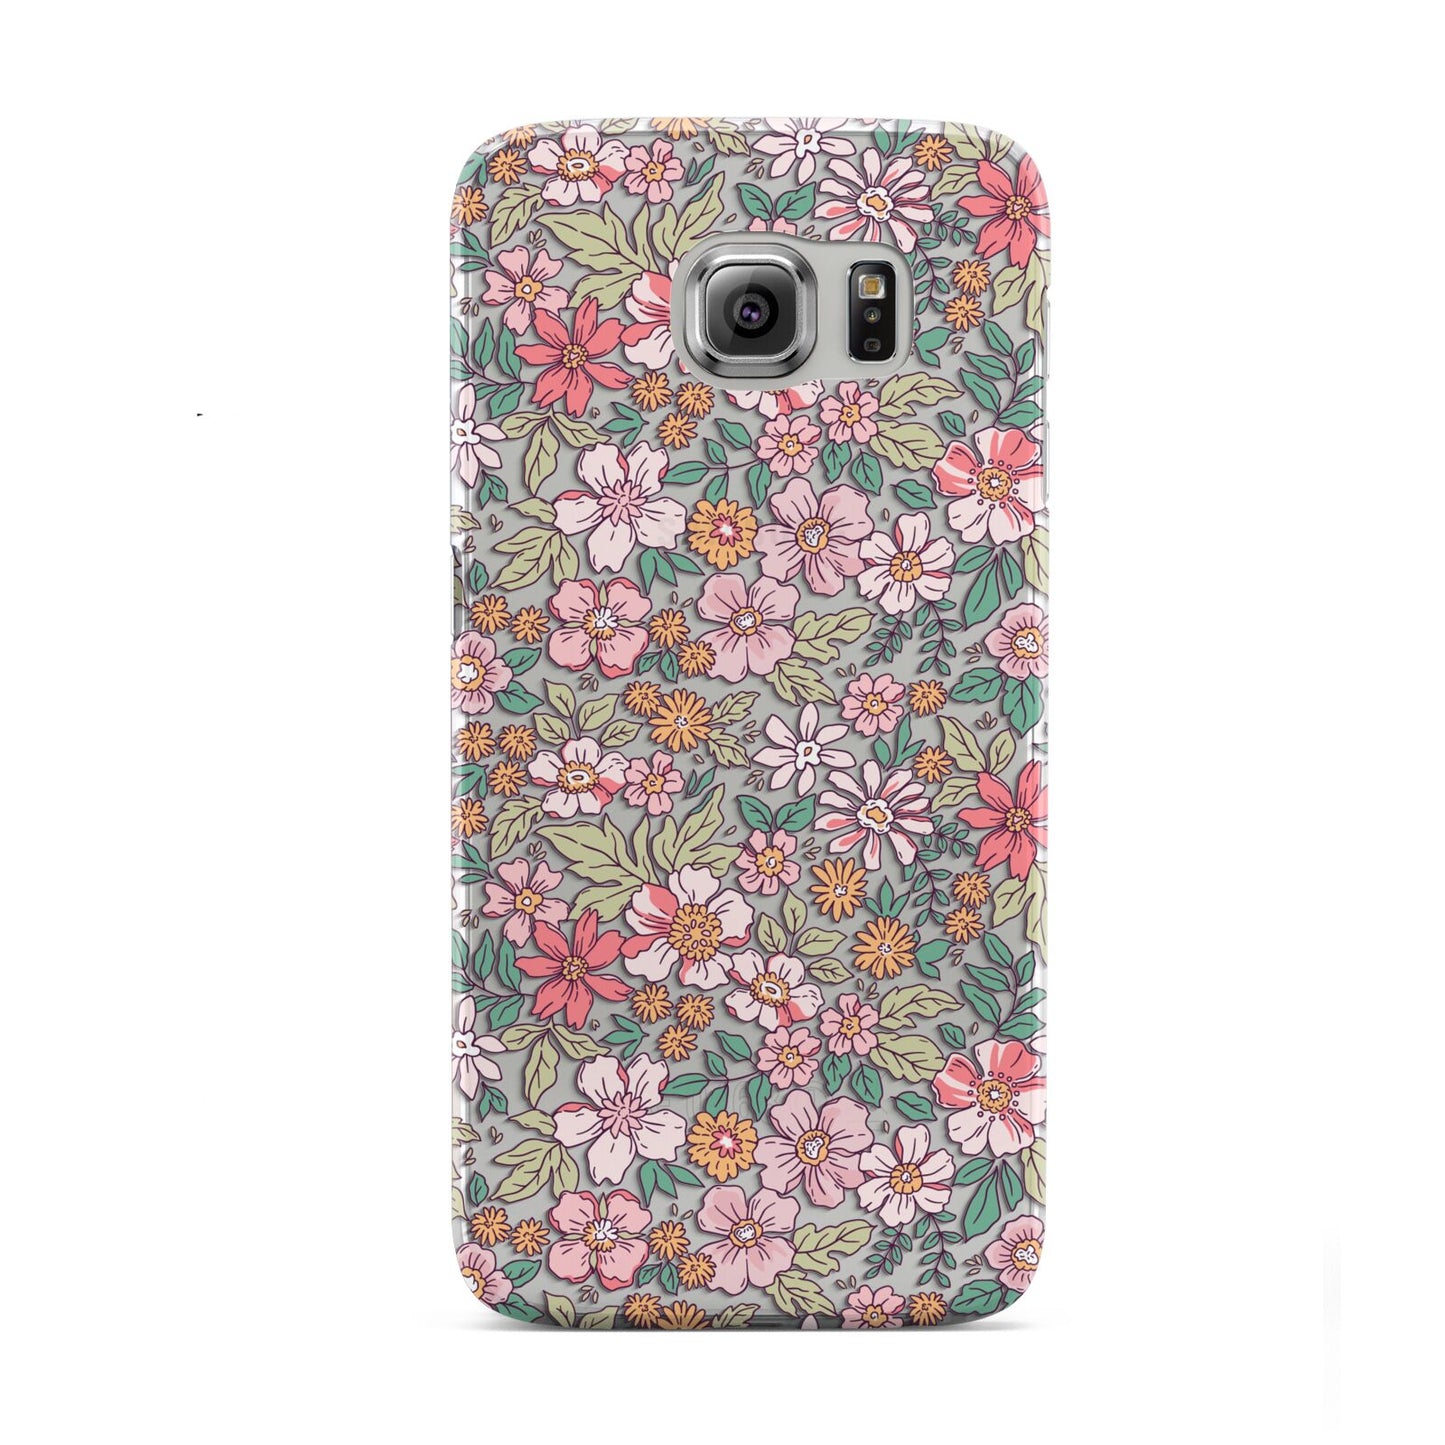 Small Floral Pattern Samsung Galaxy S6 Case